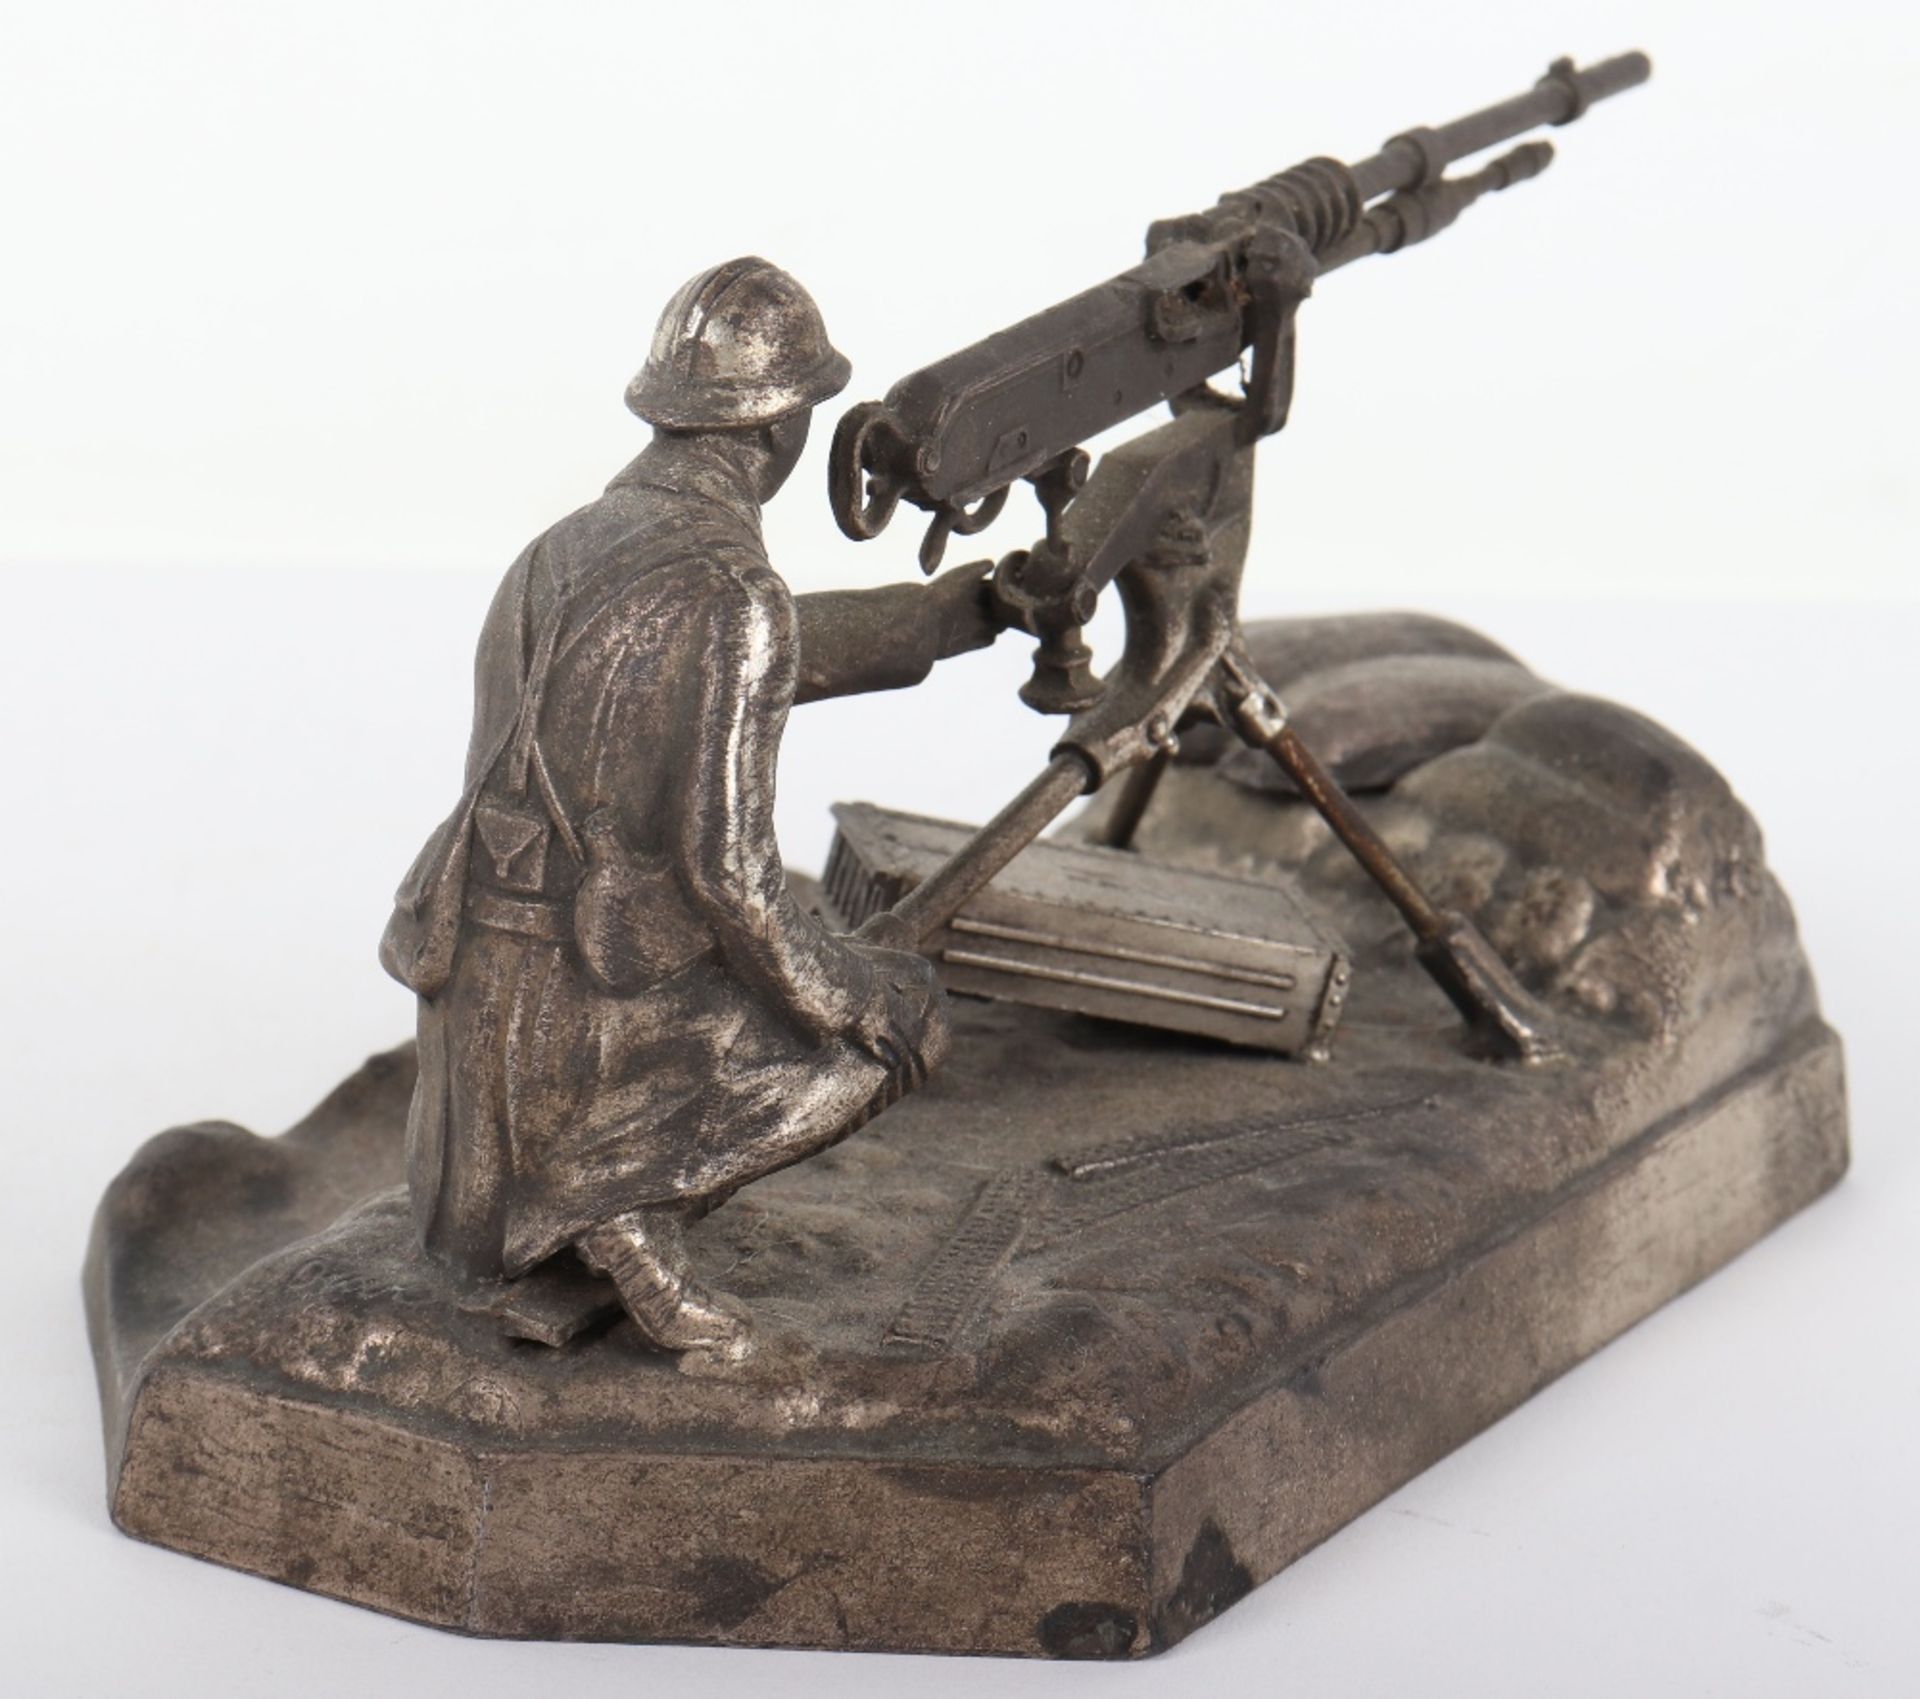 WW1 Commemorative Desk Piece in form of a French Machine Gunner in Combat - Image 5 of 10